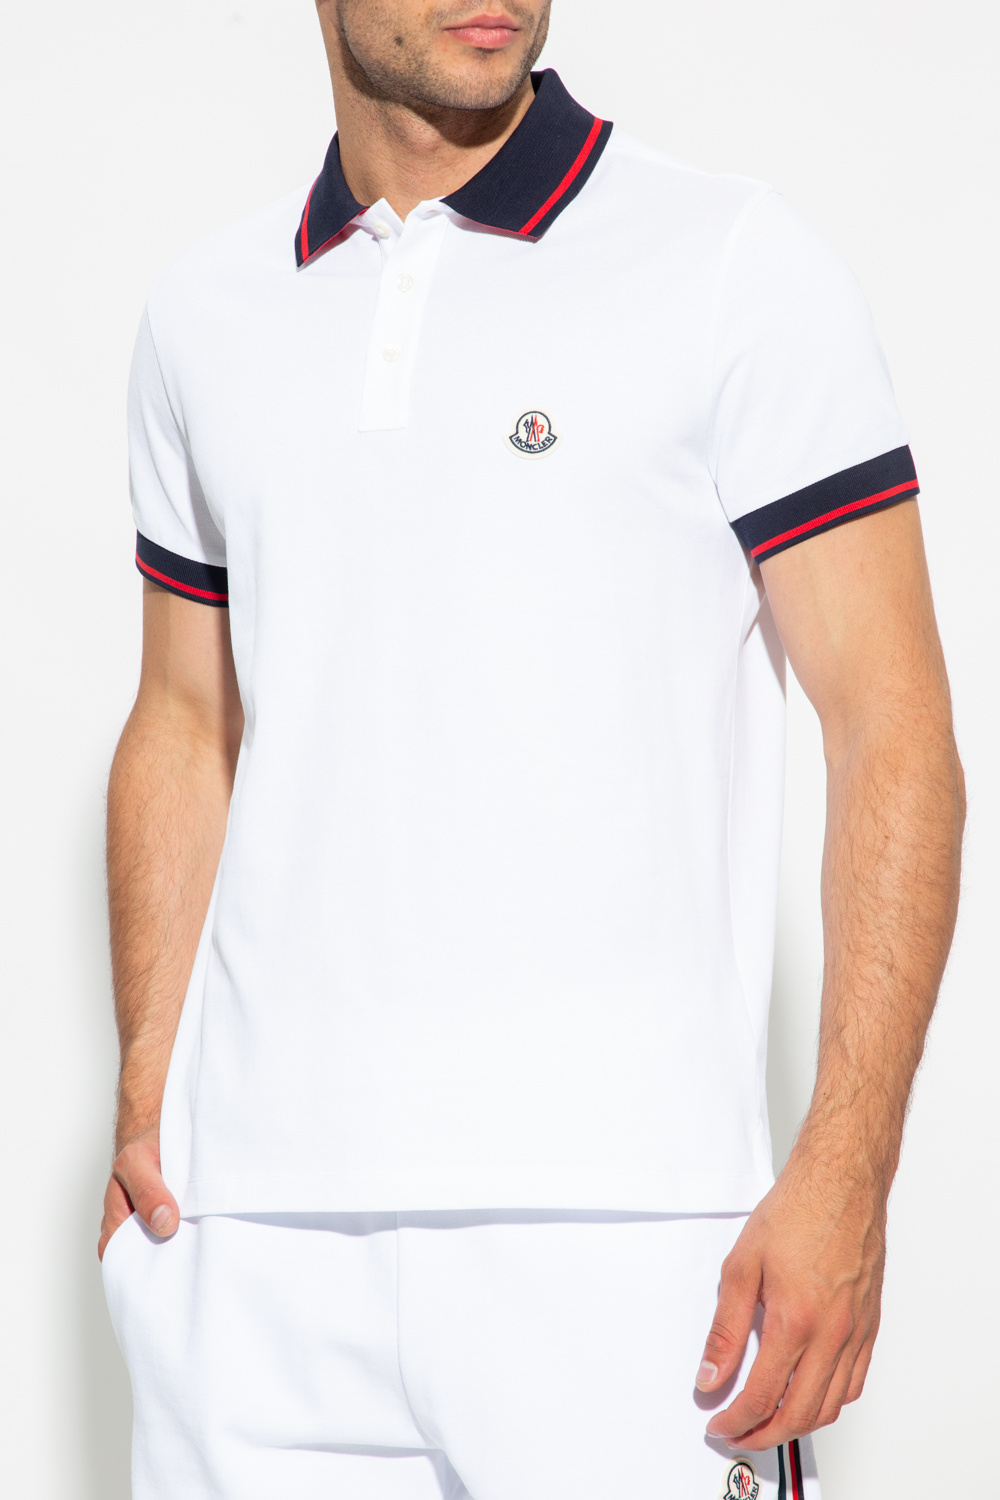 Moncler polo Nico shirt with short sleeves